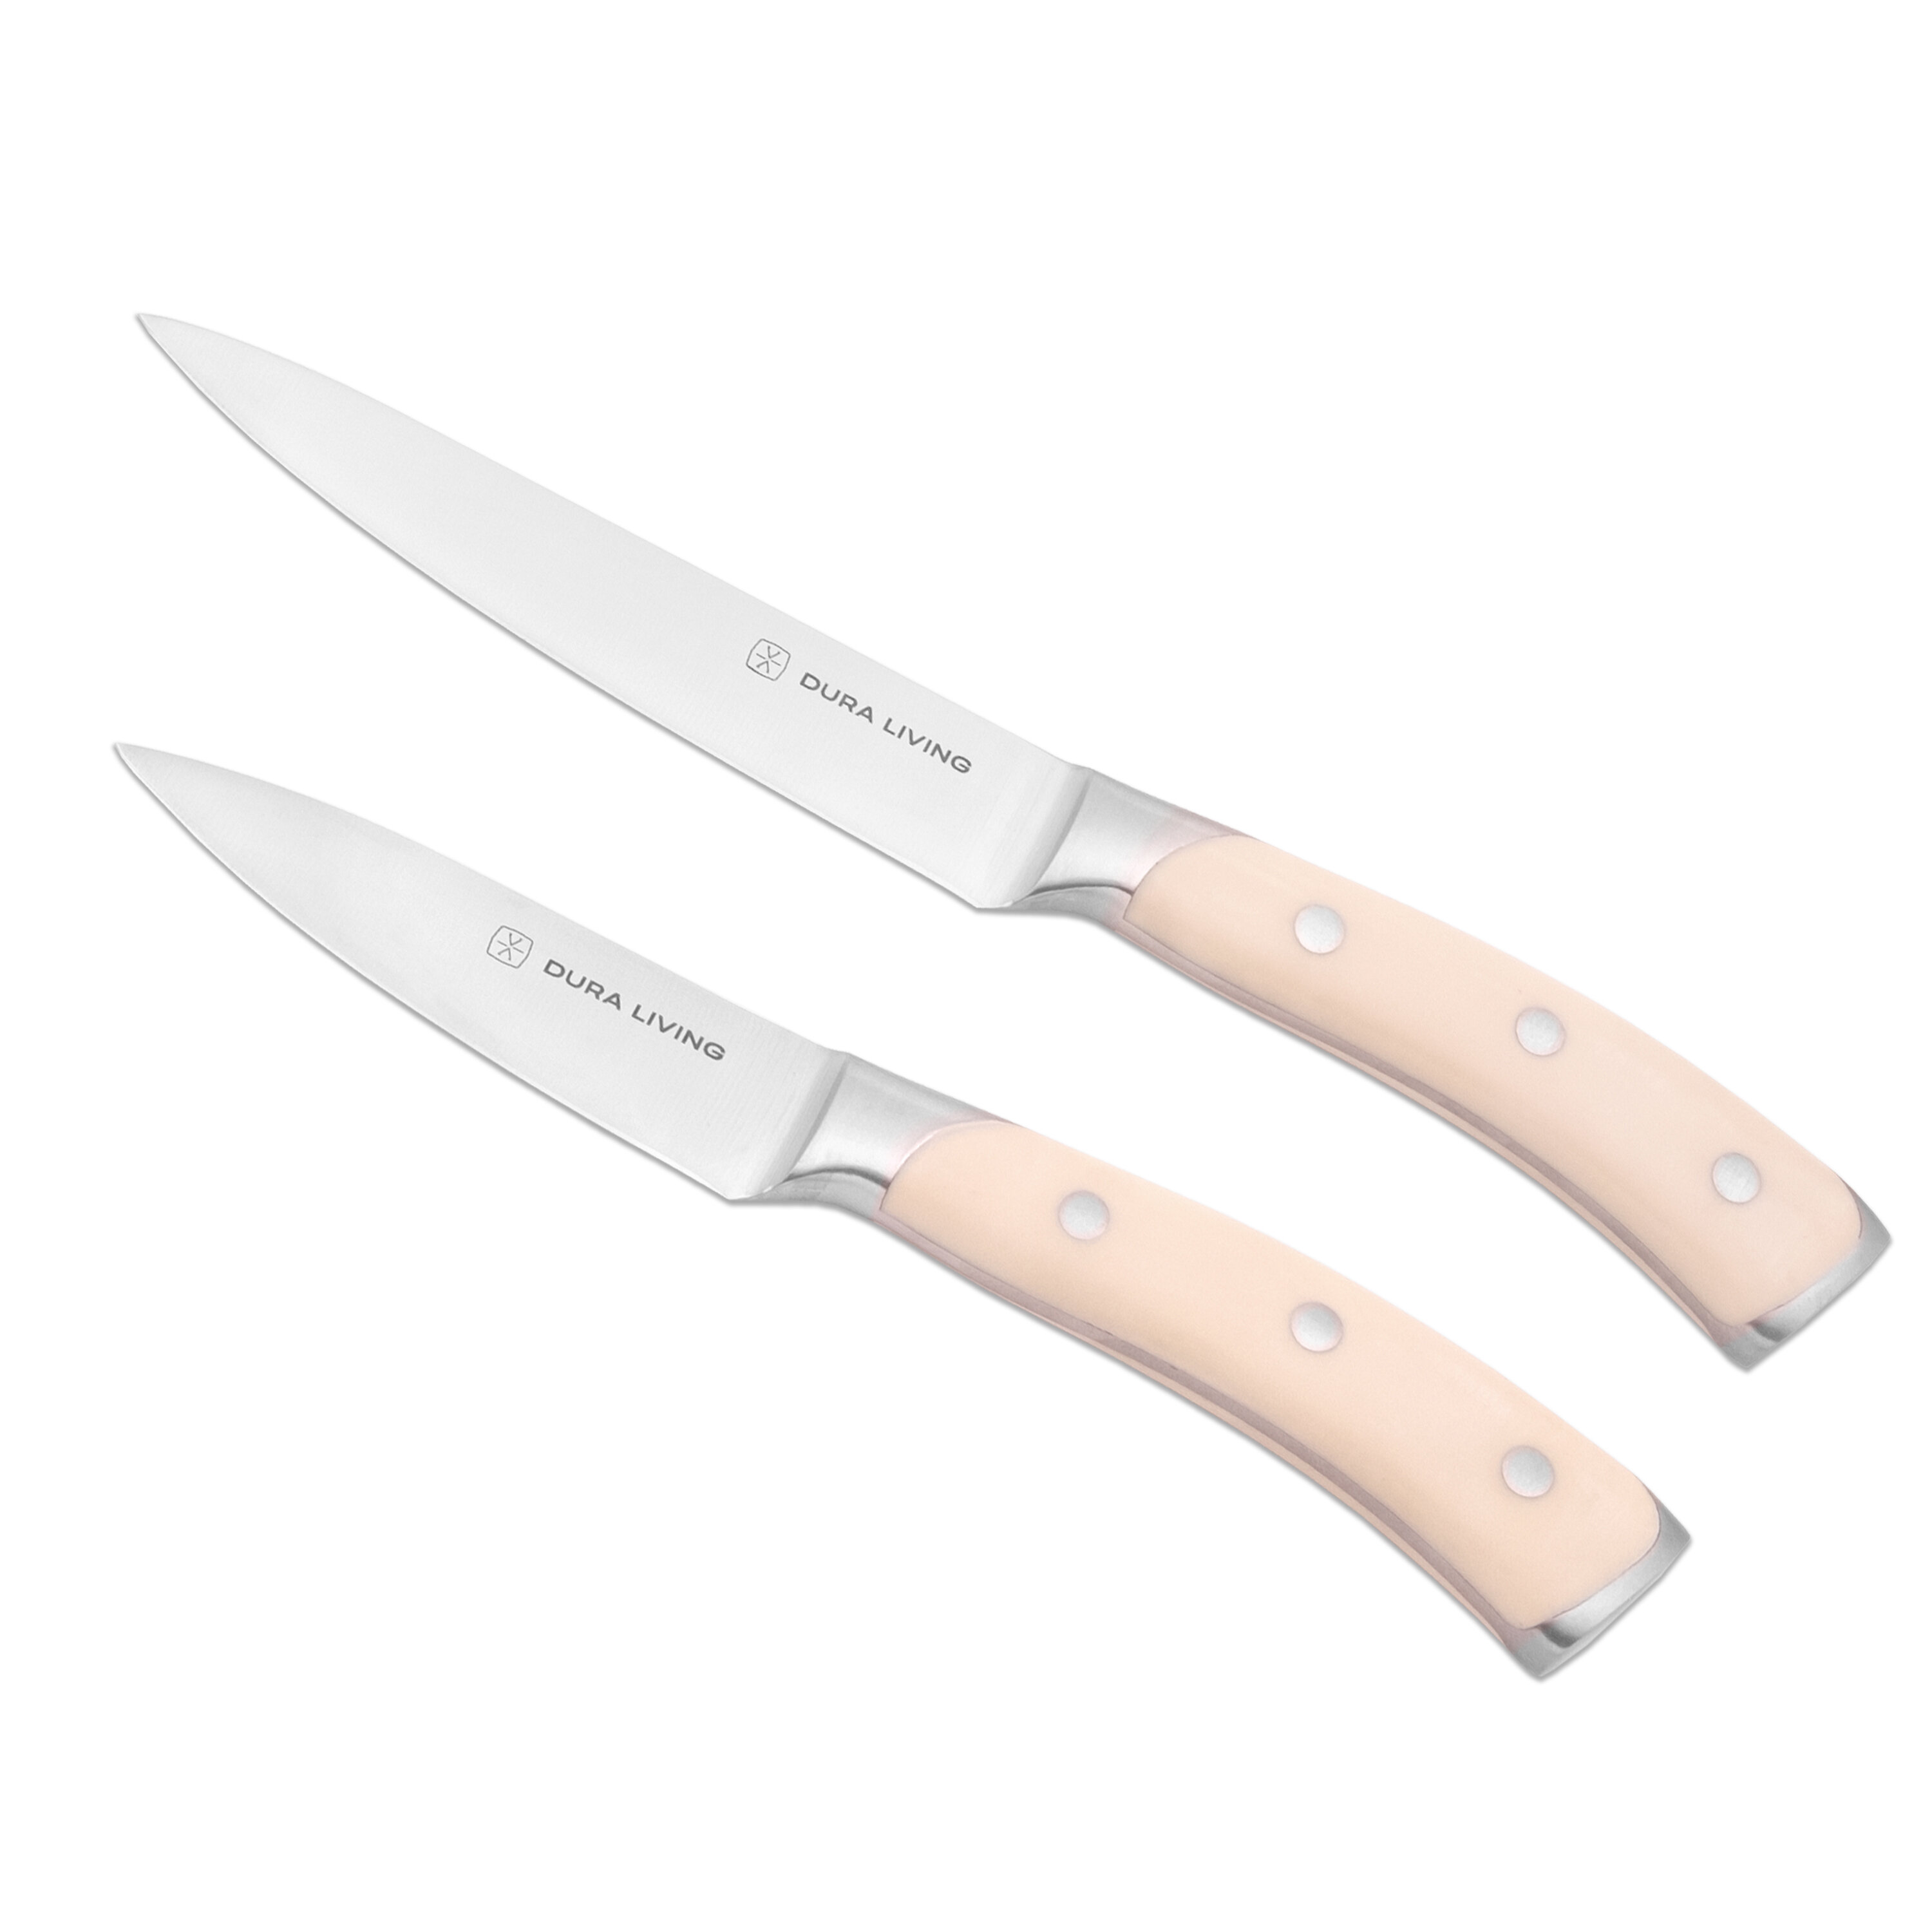 Cook N Home Paring Knife Set 4-Piece, High Carbon German Stainless